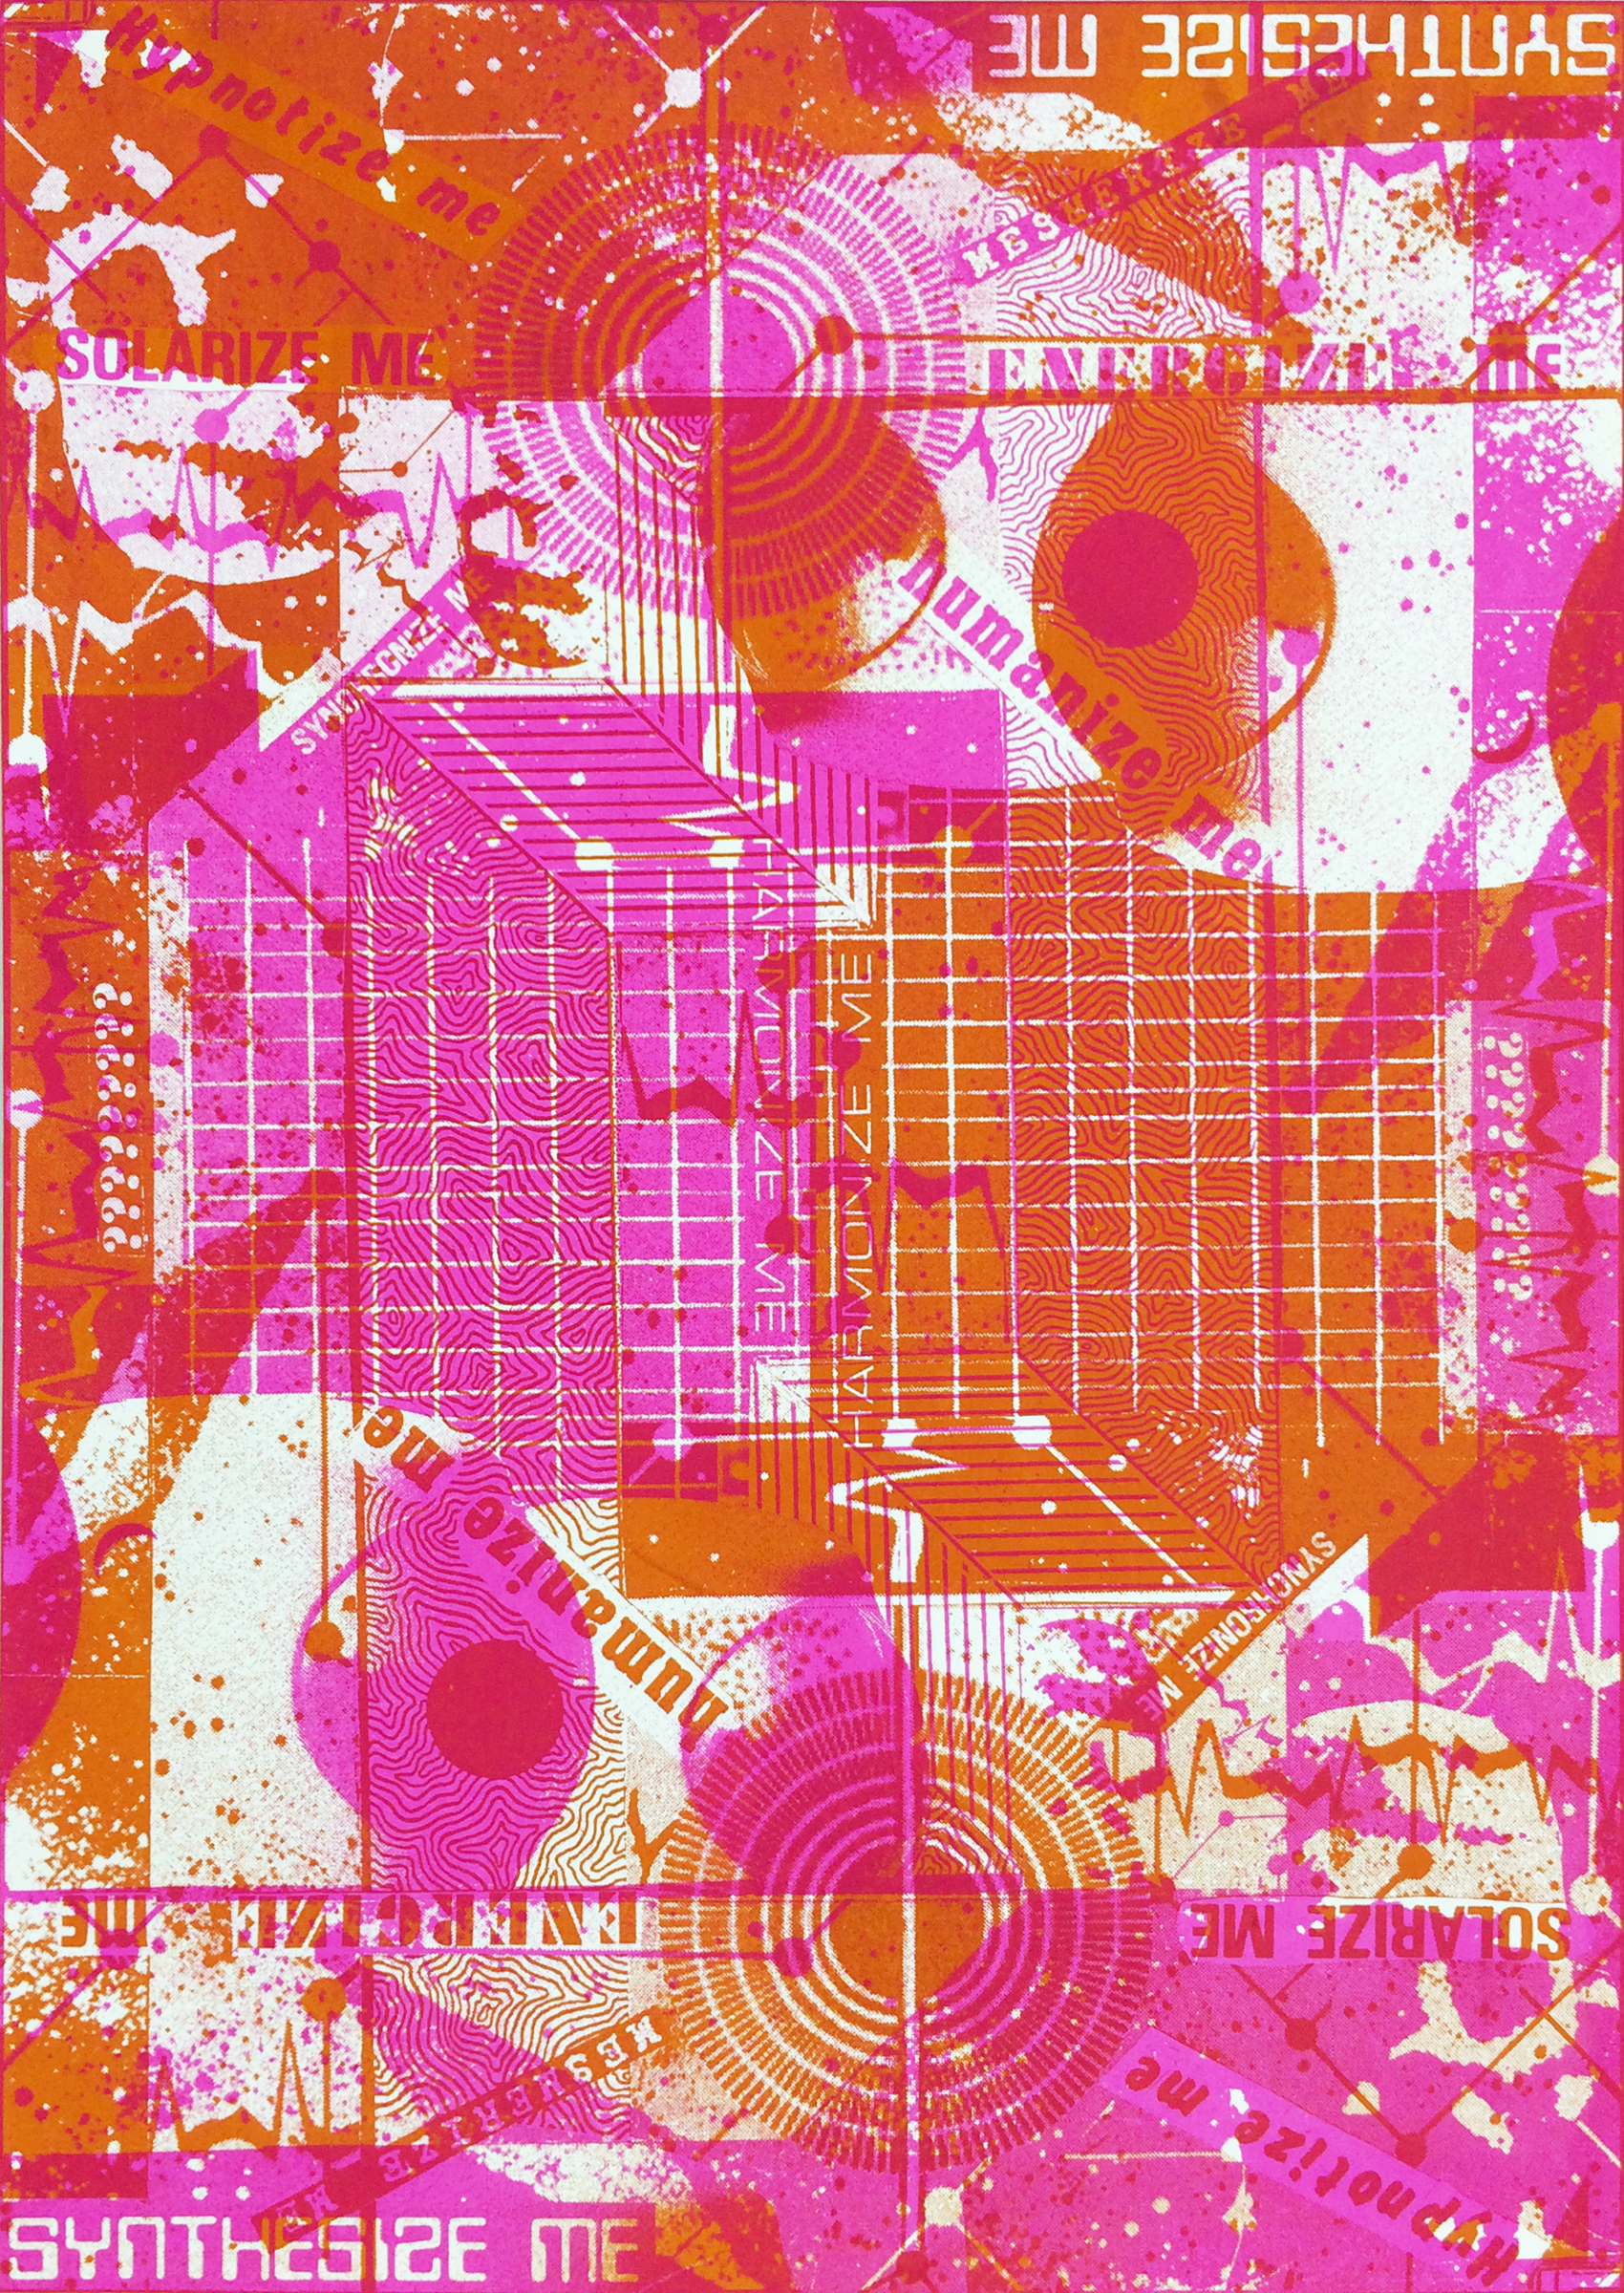   GWENAËL RATTKE   Synthesize Me , unique silkscreen on paper (1 of 1), 30.25" x 22.5", 2014 